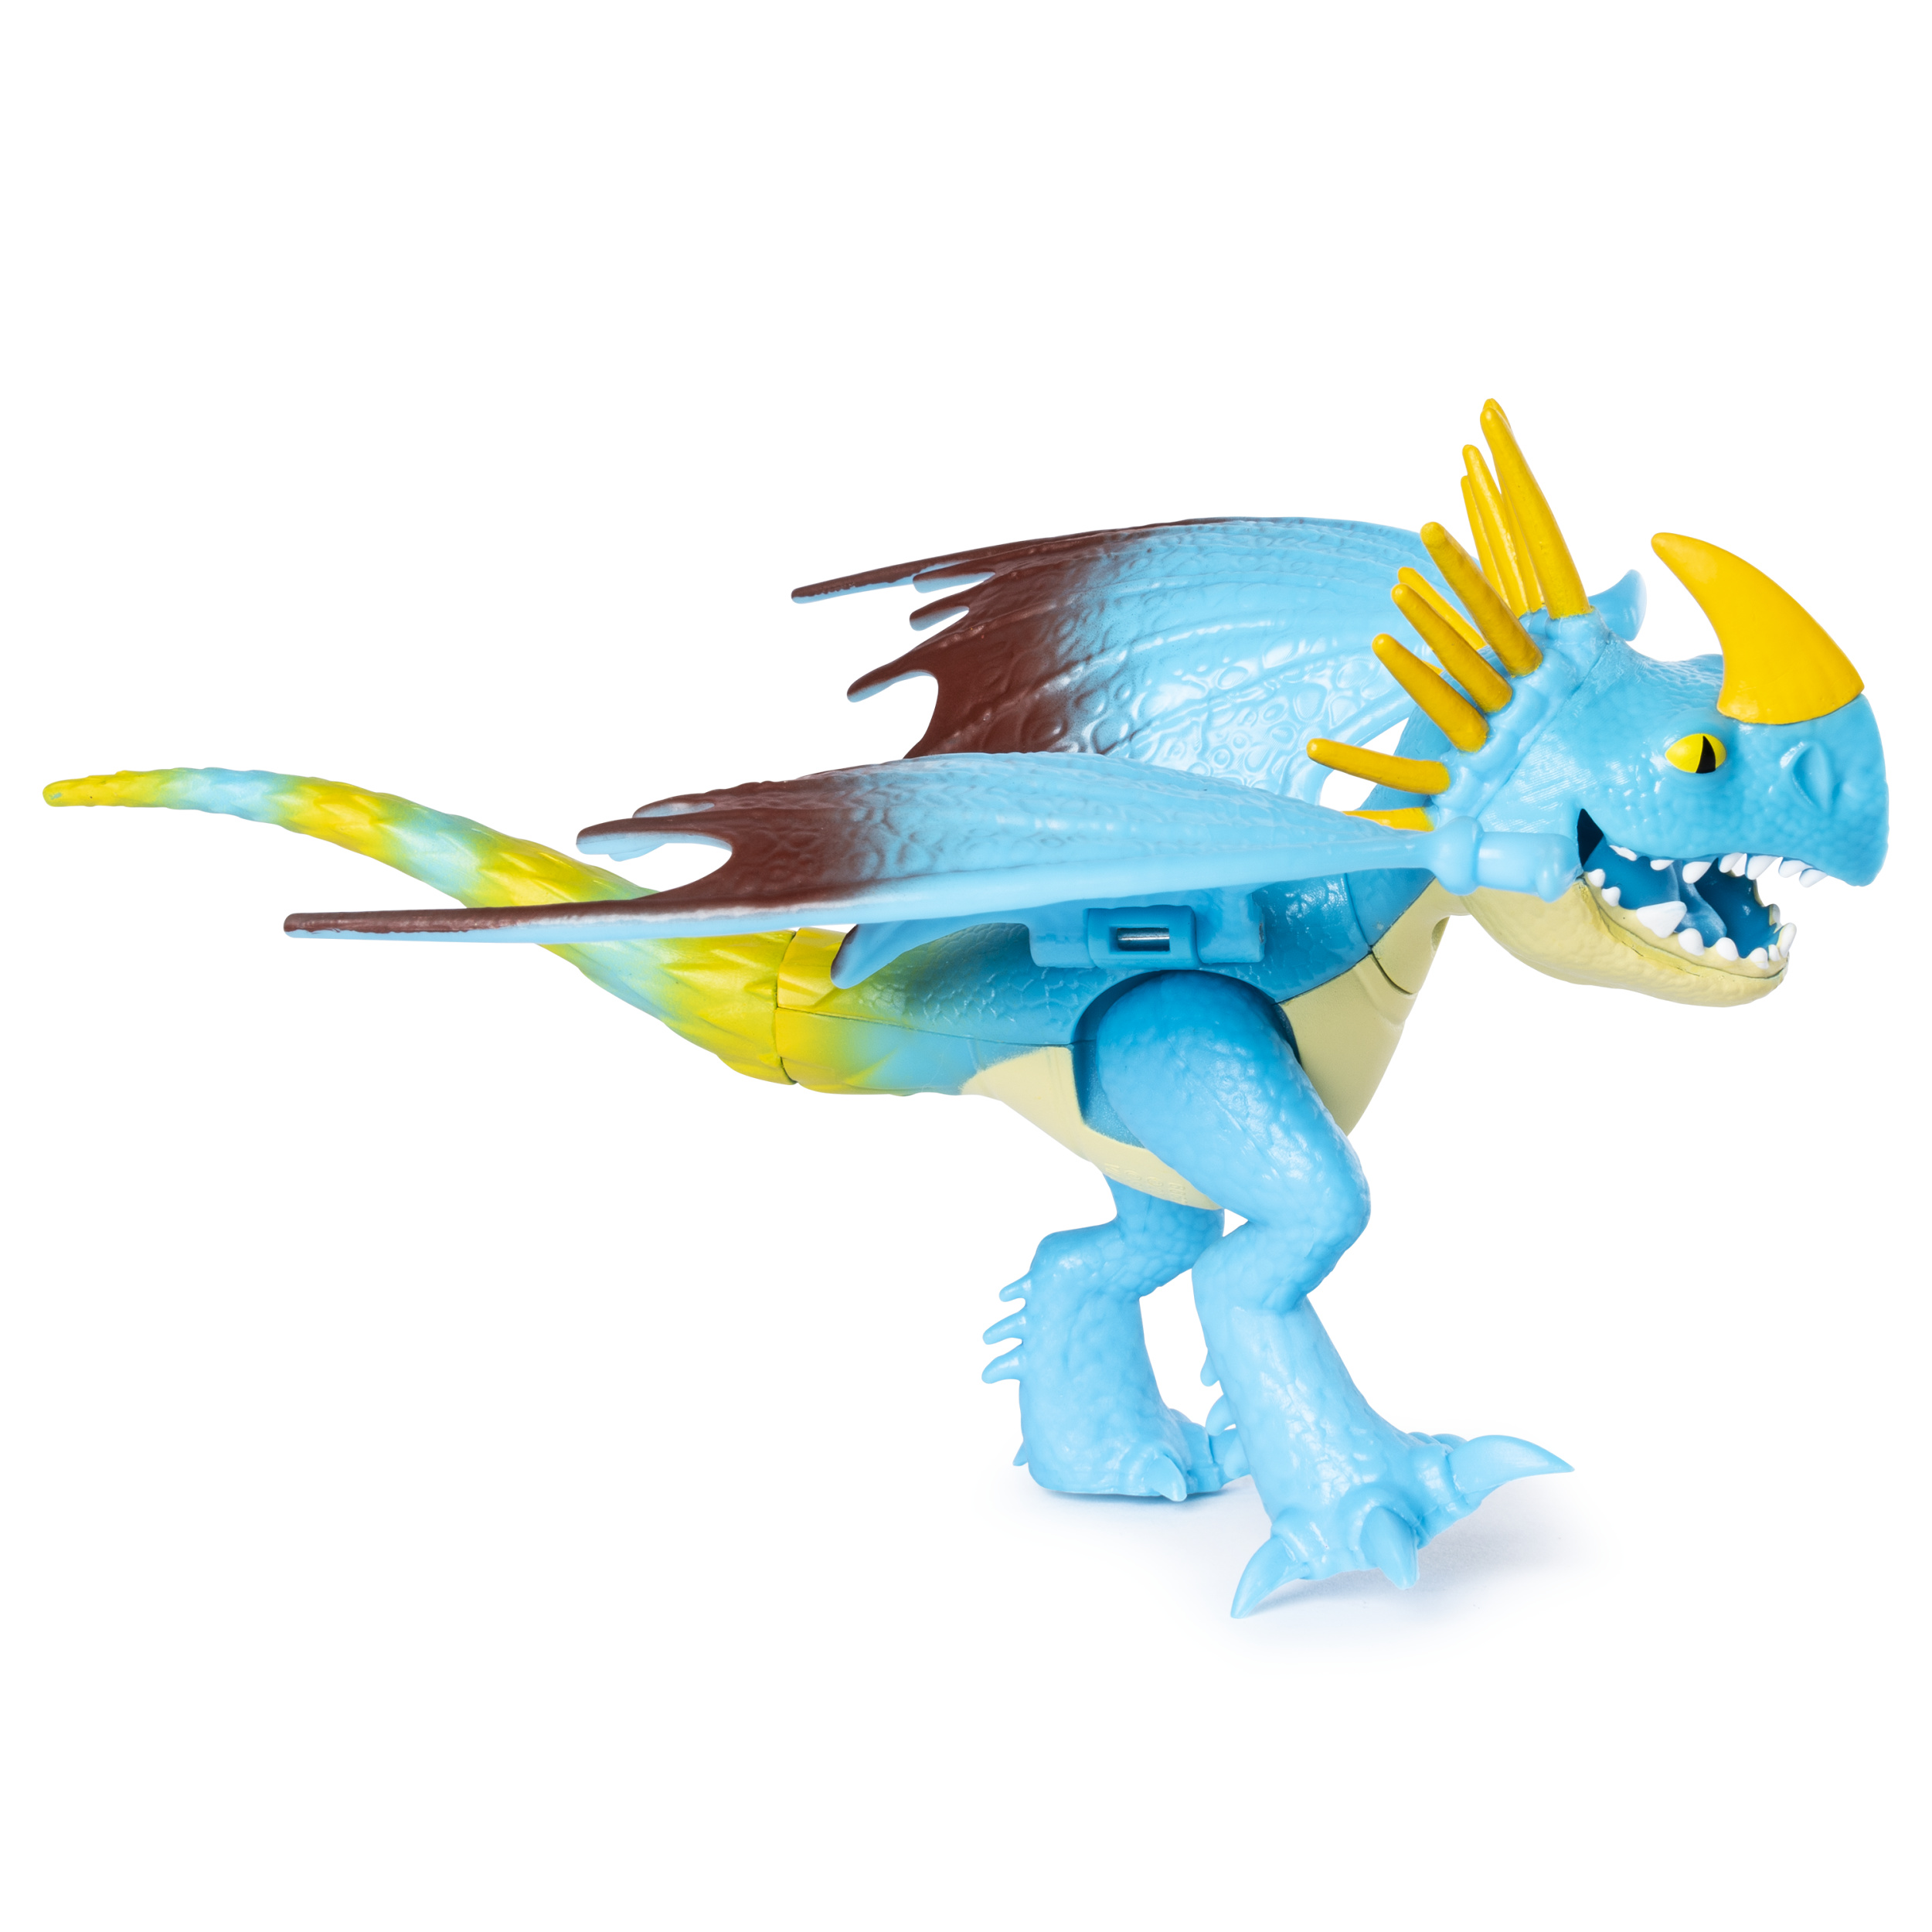 DreamWorks Dragons, Stormfly Dragon Figure with Moving Parts, for Kids Aged 4 and up - image 2 of 4